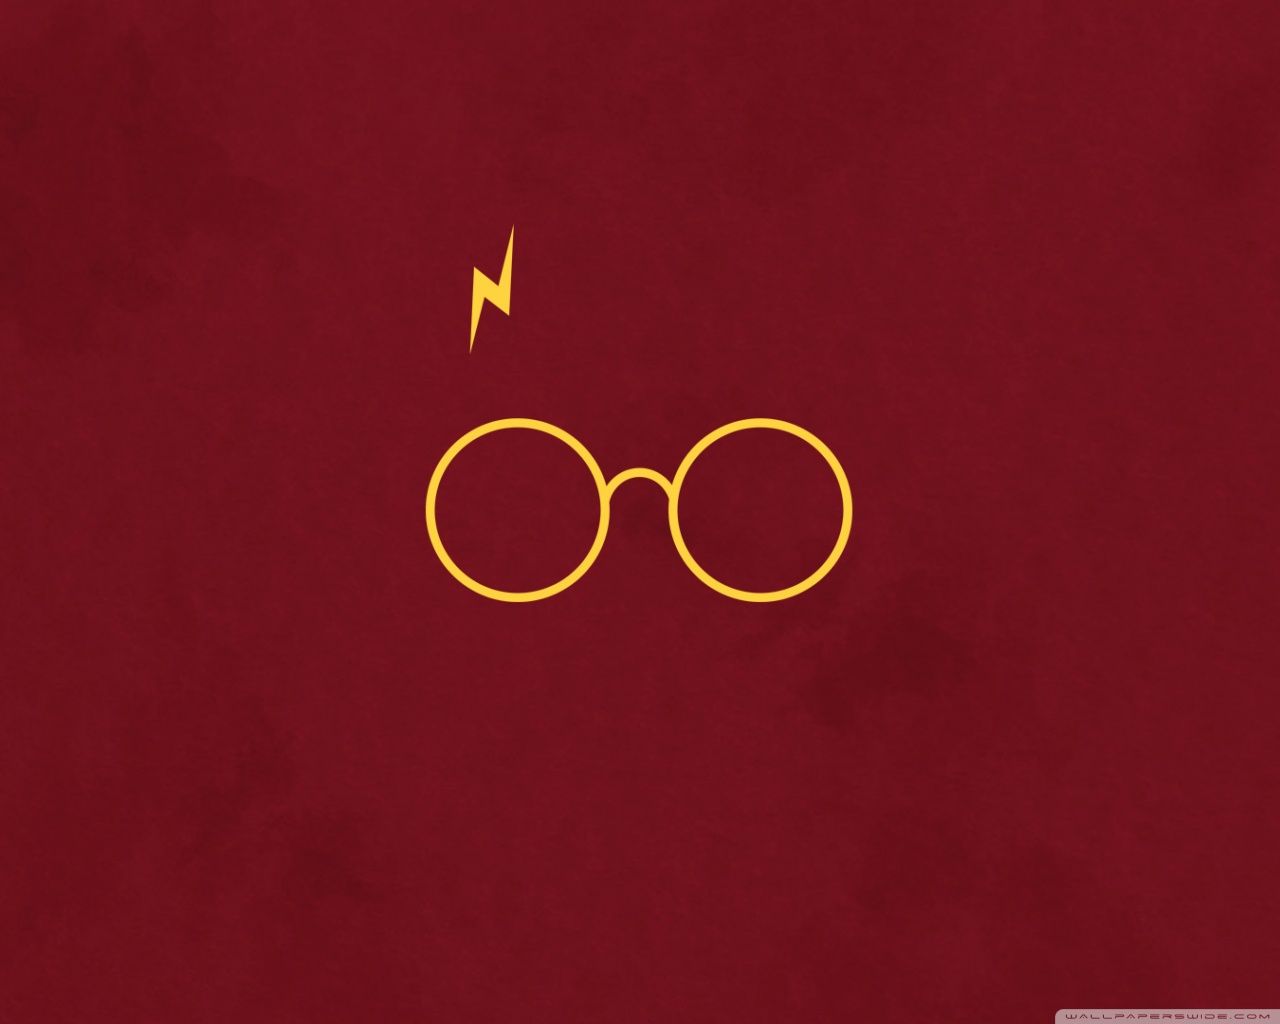 Featured image of post Harry Potter Symbol Wallpaper Hd - Download, share or upload your own one!